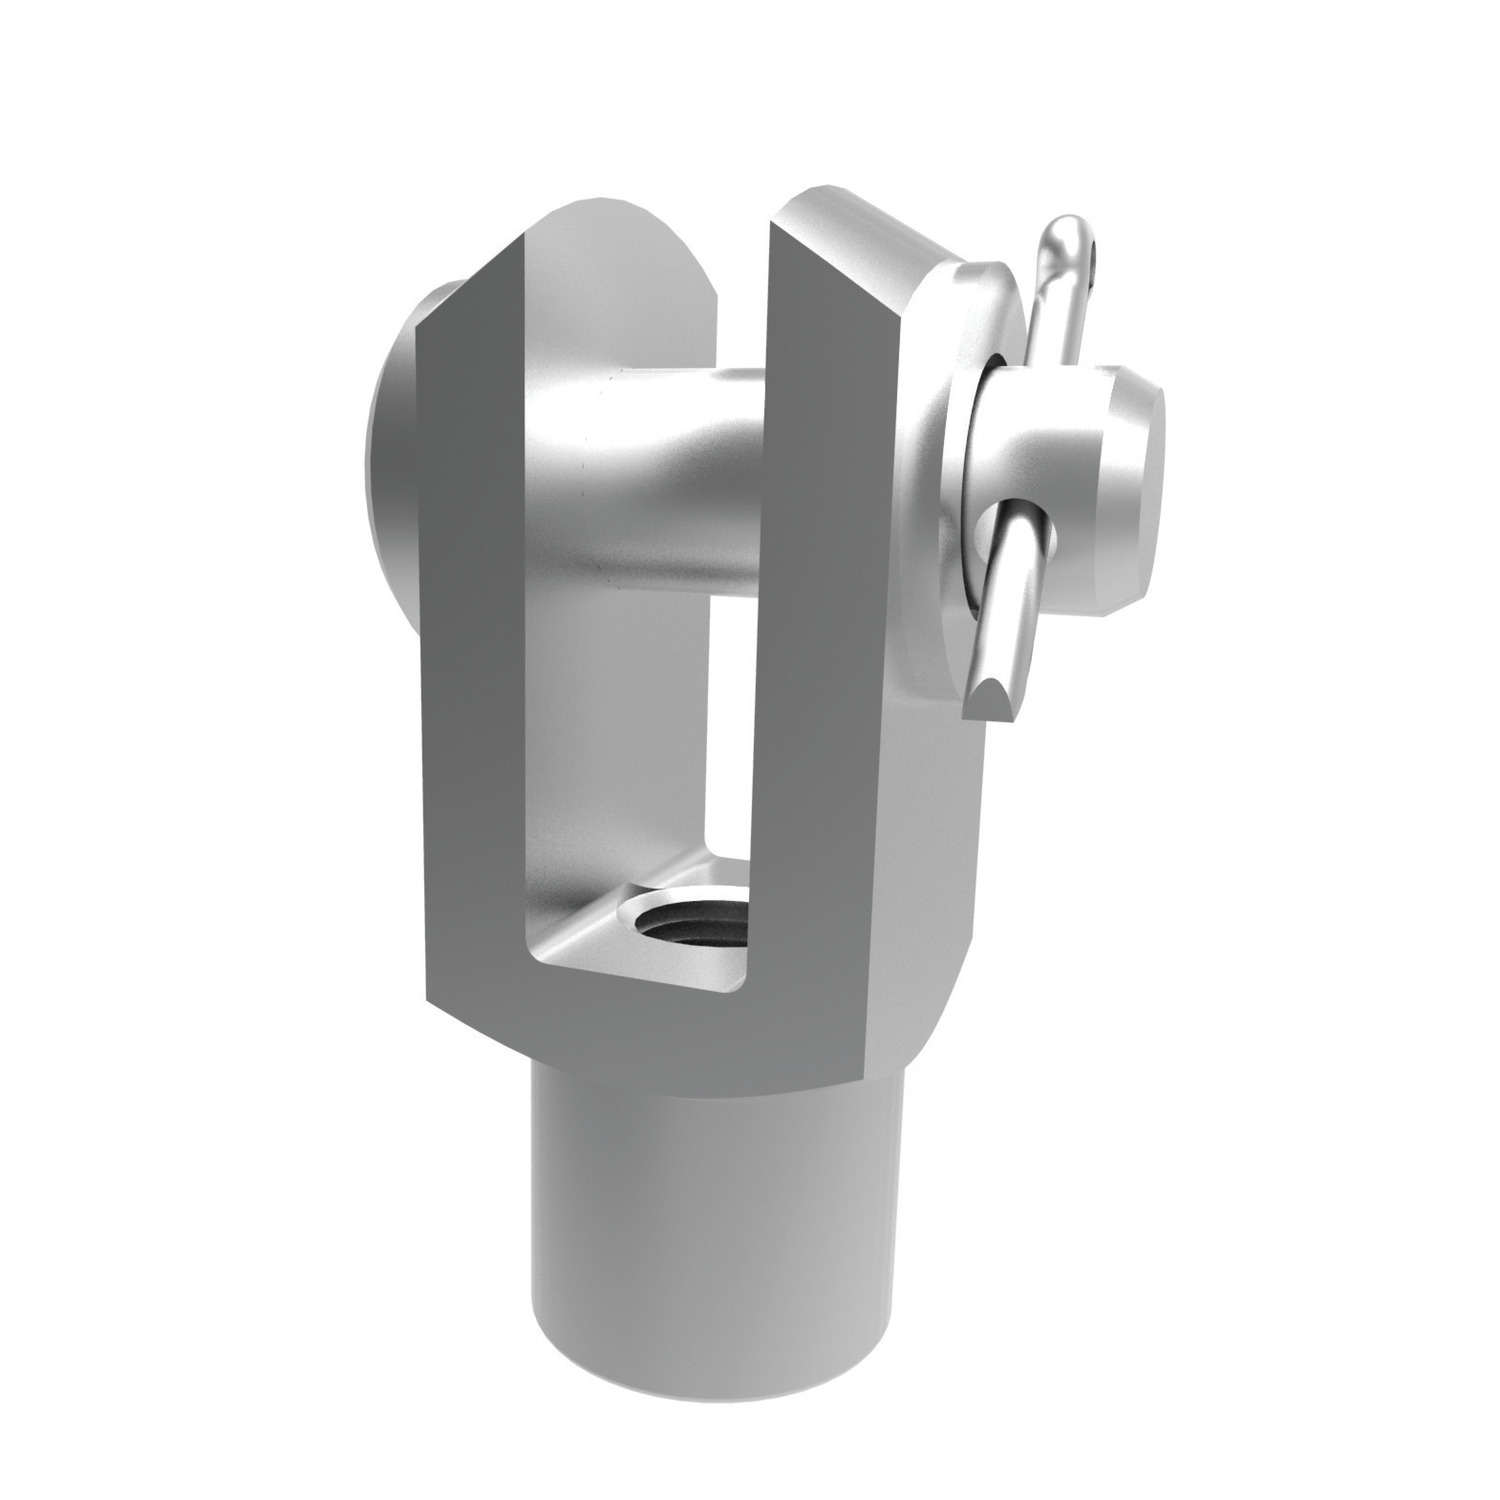 Product R3390, Steel Clevis Joints with Pin left hand thread - silver zinc plated / 